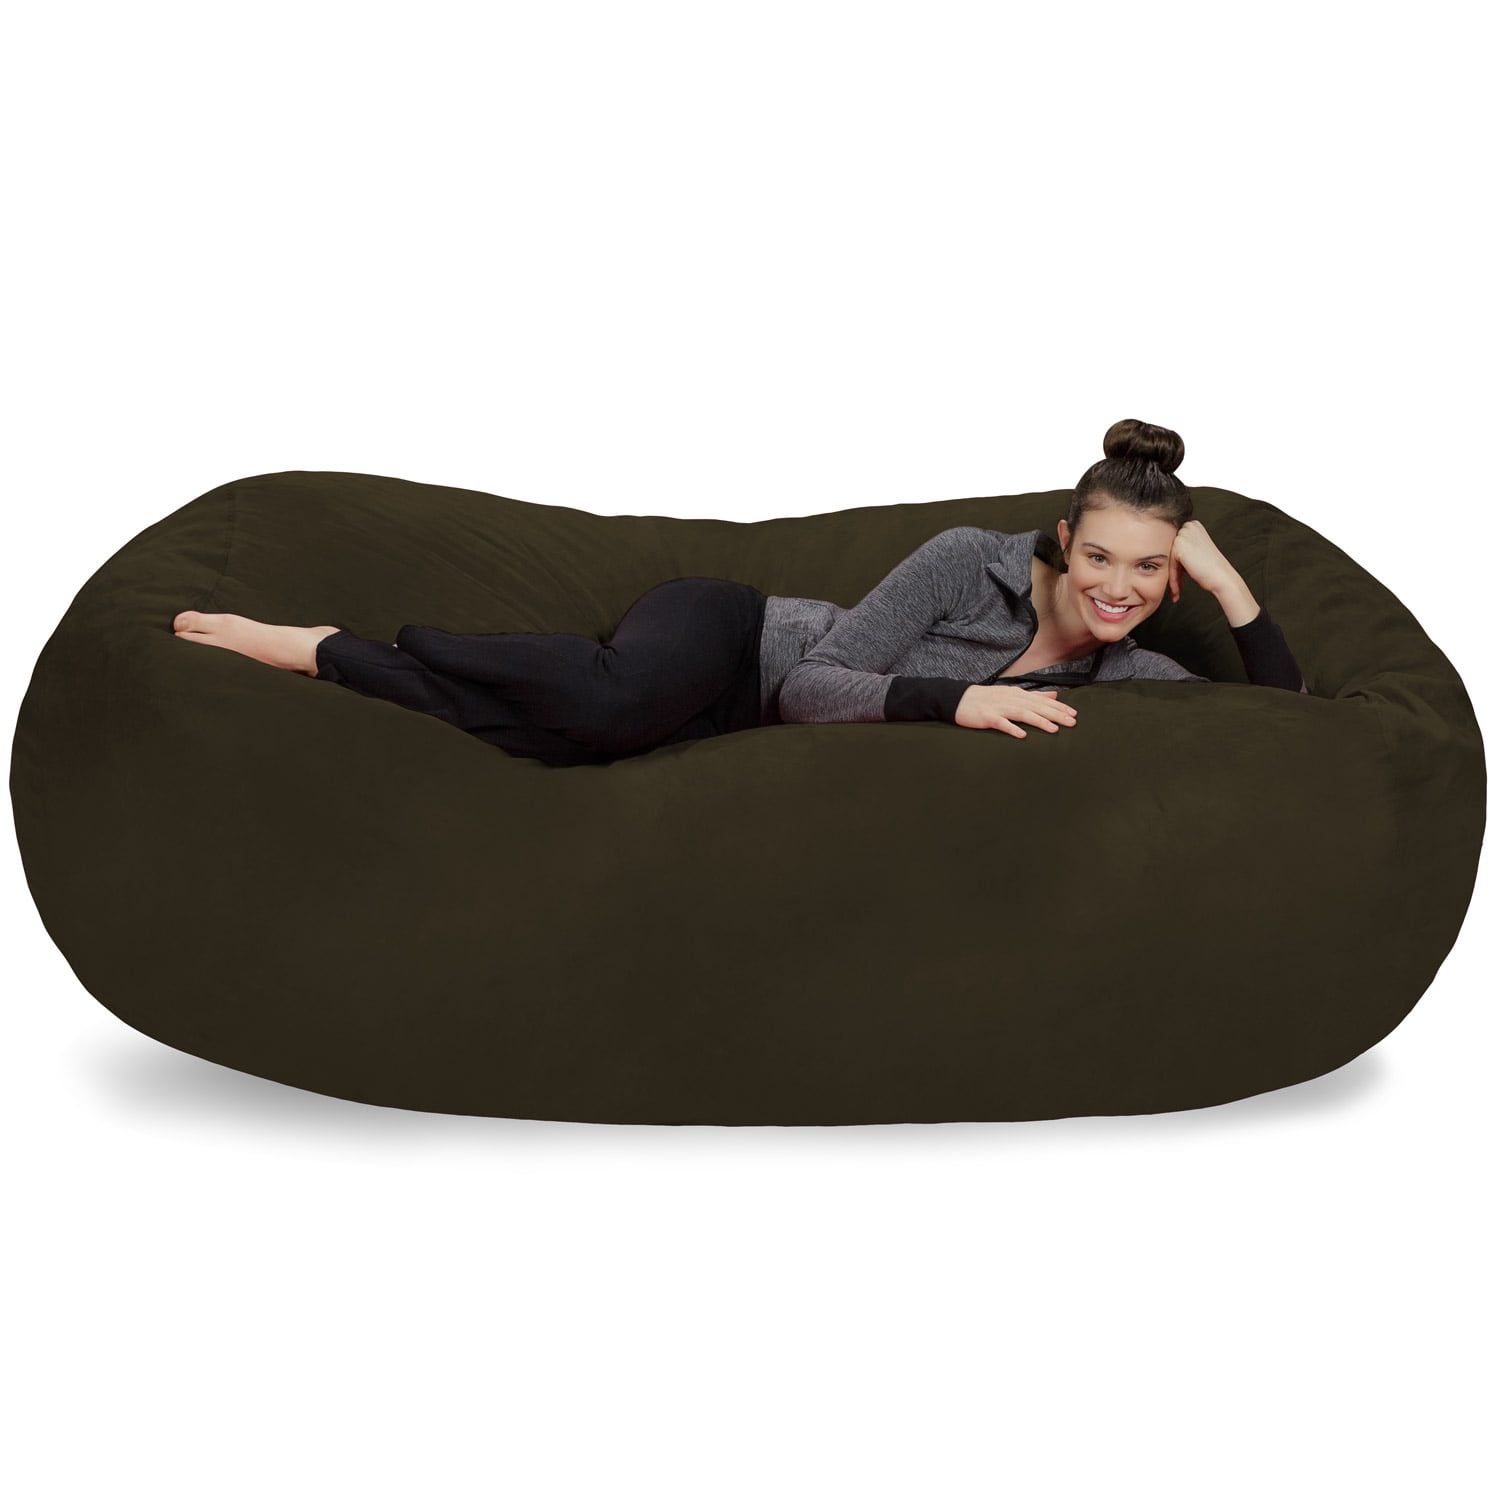 Sofa Sack Bean Bag Chair Memory Foam Lounger With Microsuede Cover Kids Adults 7 5 Ft Olive F31aa6c2 8676 4851 8702 Fbfc6d847ddc 1.70df81e918288bcf6a202be01b77be50 